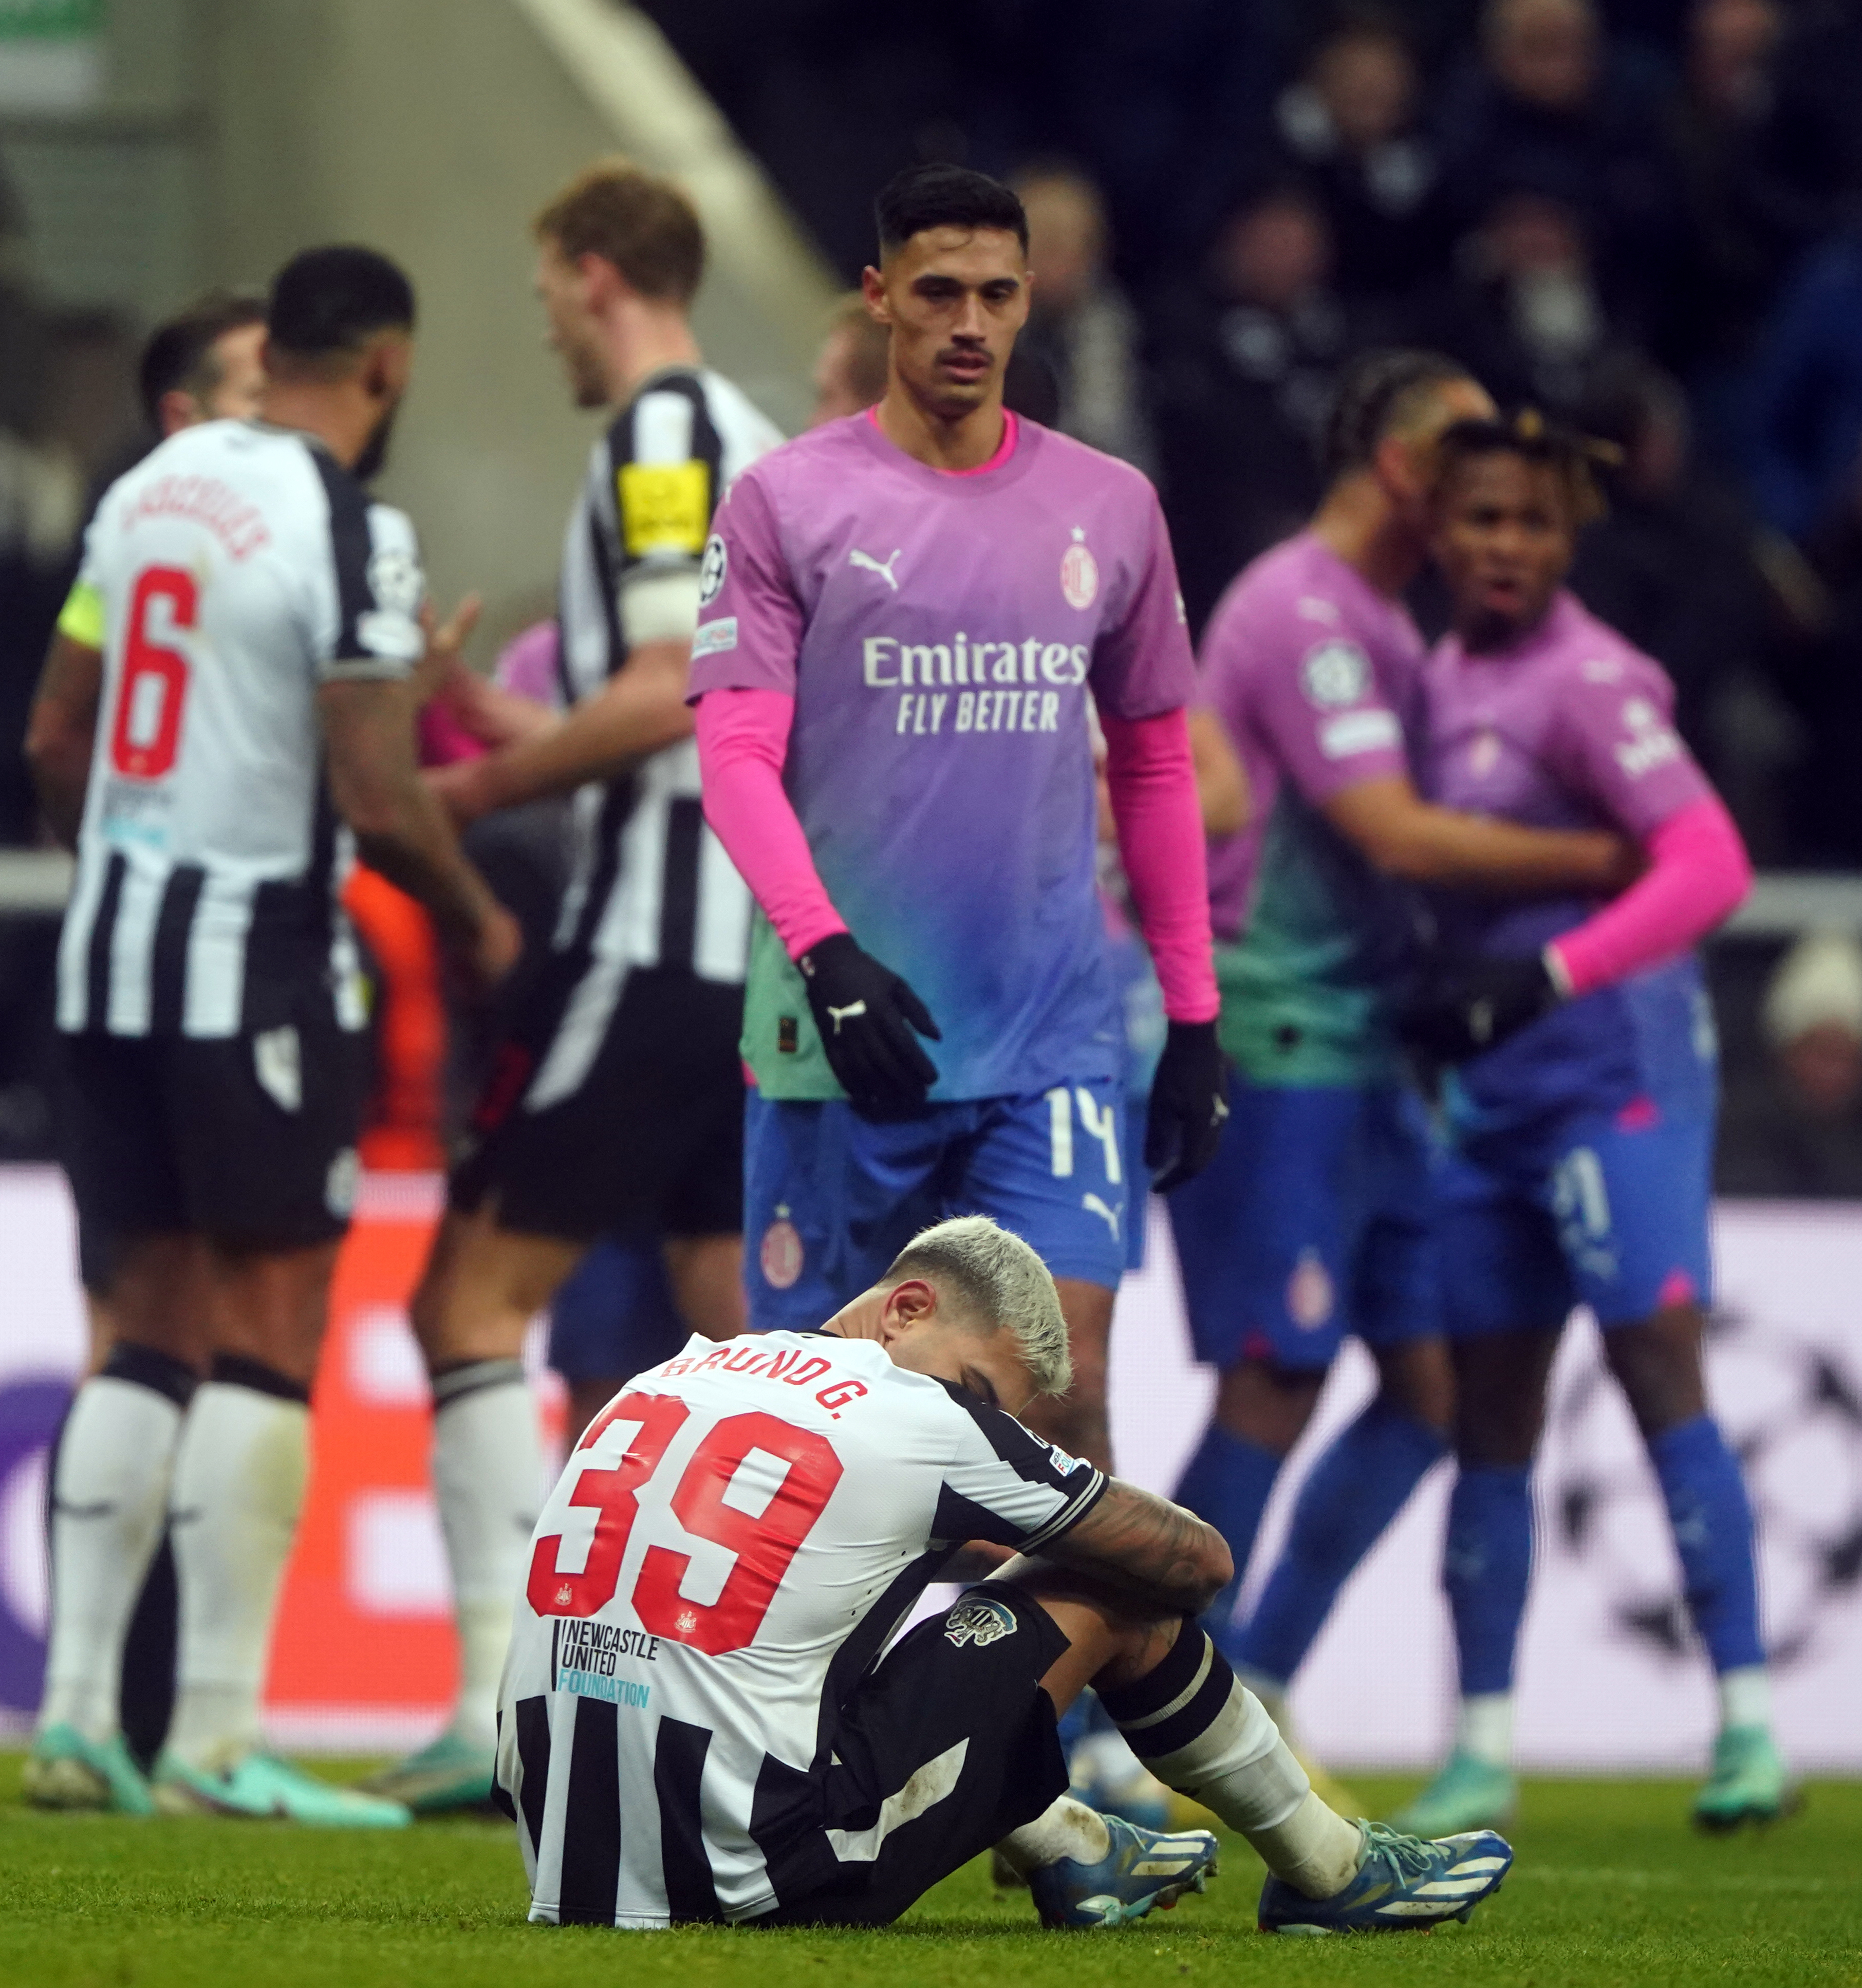 Newcastle lost 2-1 at home to AC Milan as their Champions League dream slipped away